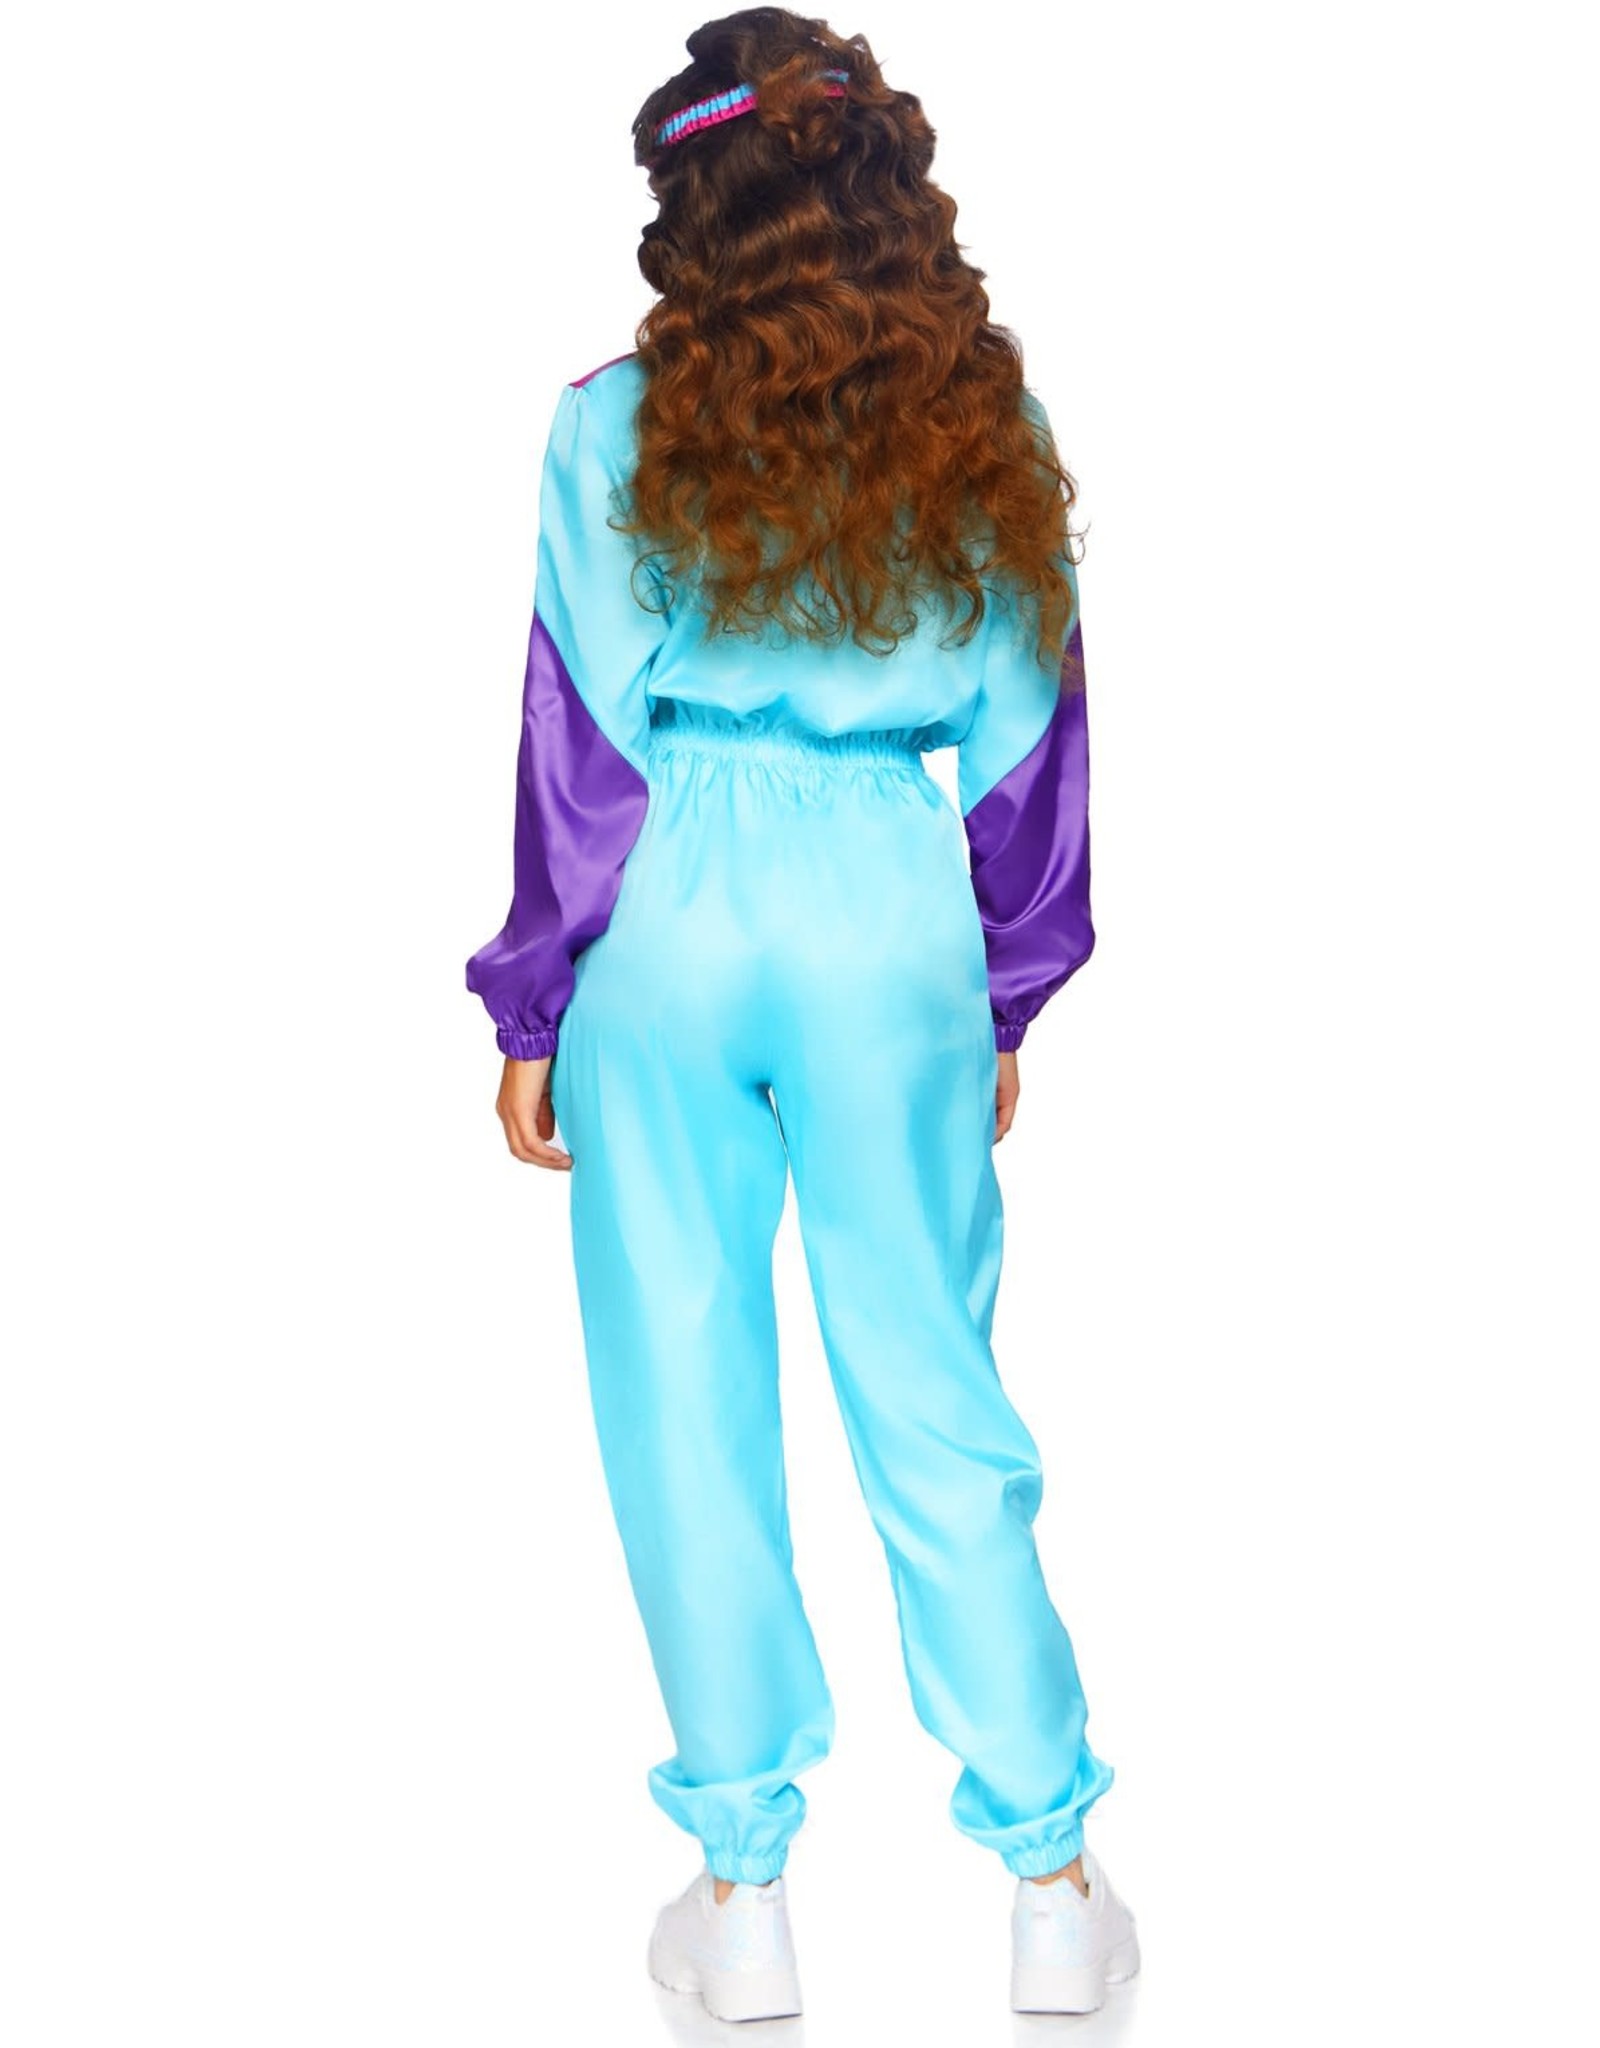 Leg Avenue Awesome 80's track suit